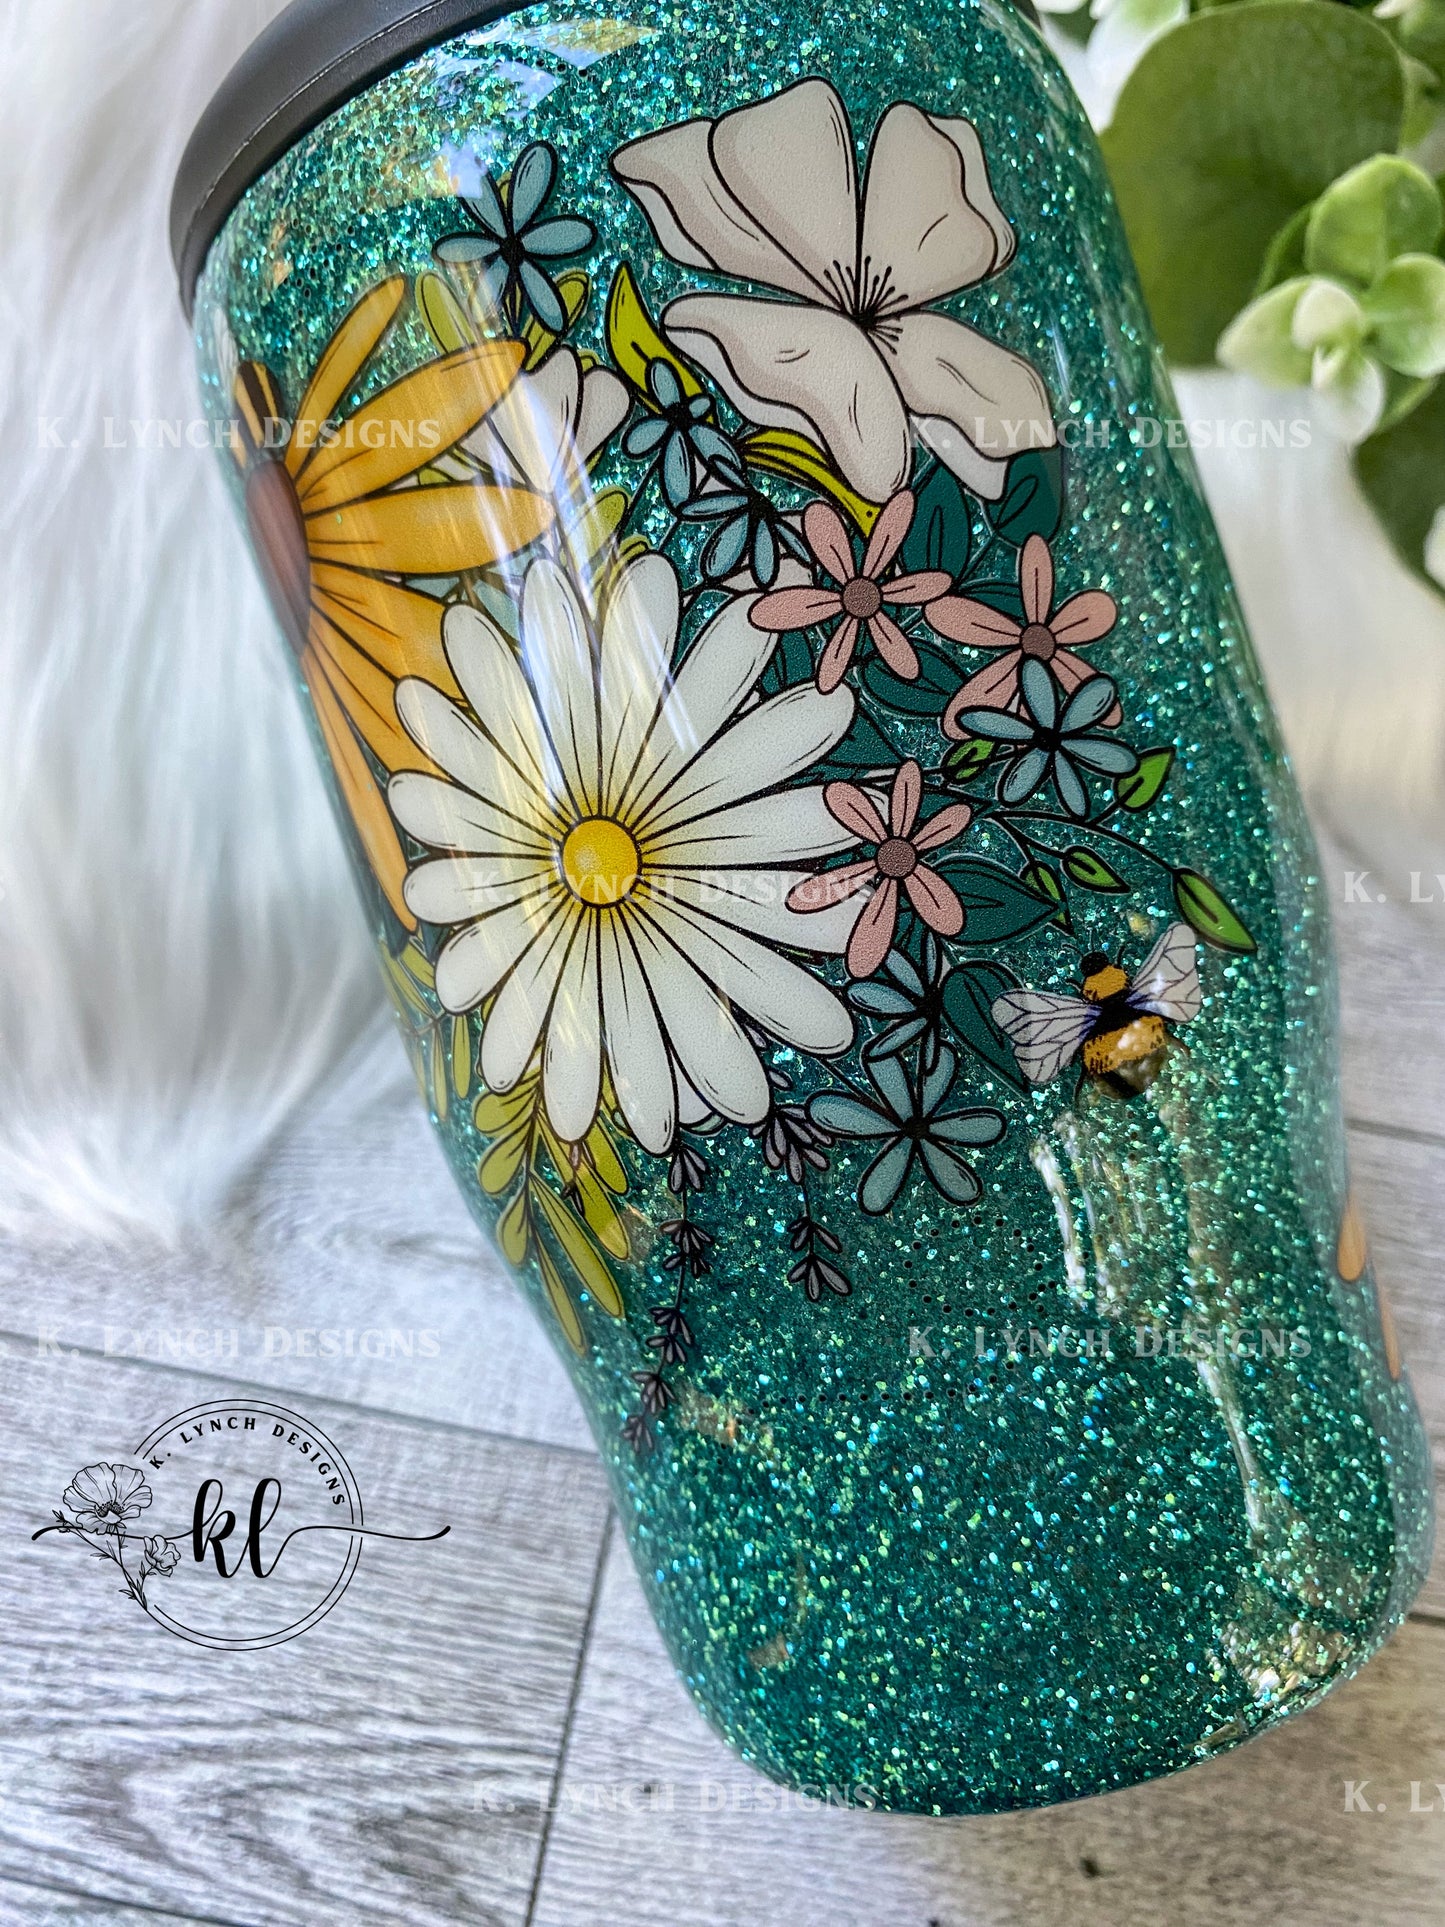 "Stay Wild" Floral Glitter 4-in-1 Can Cooler